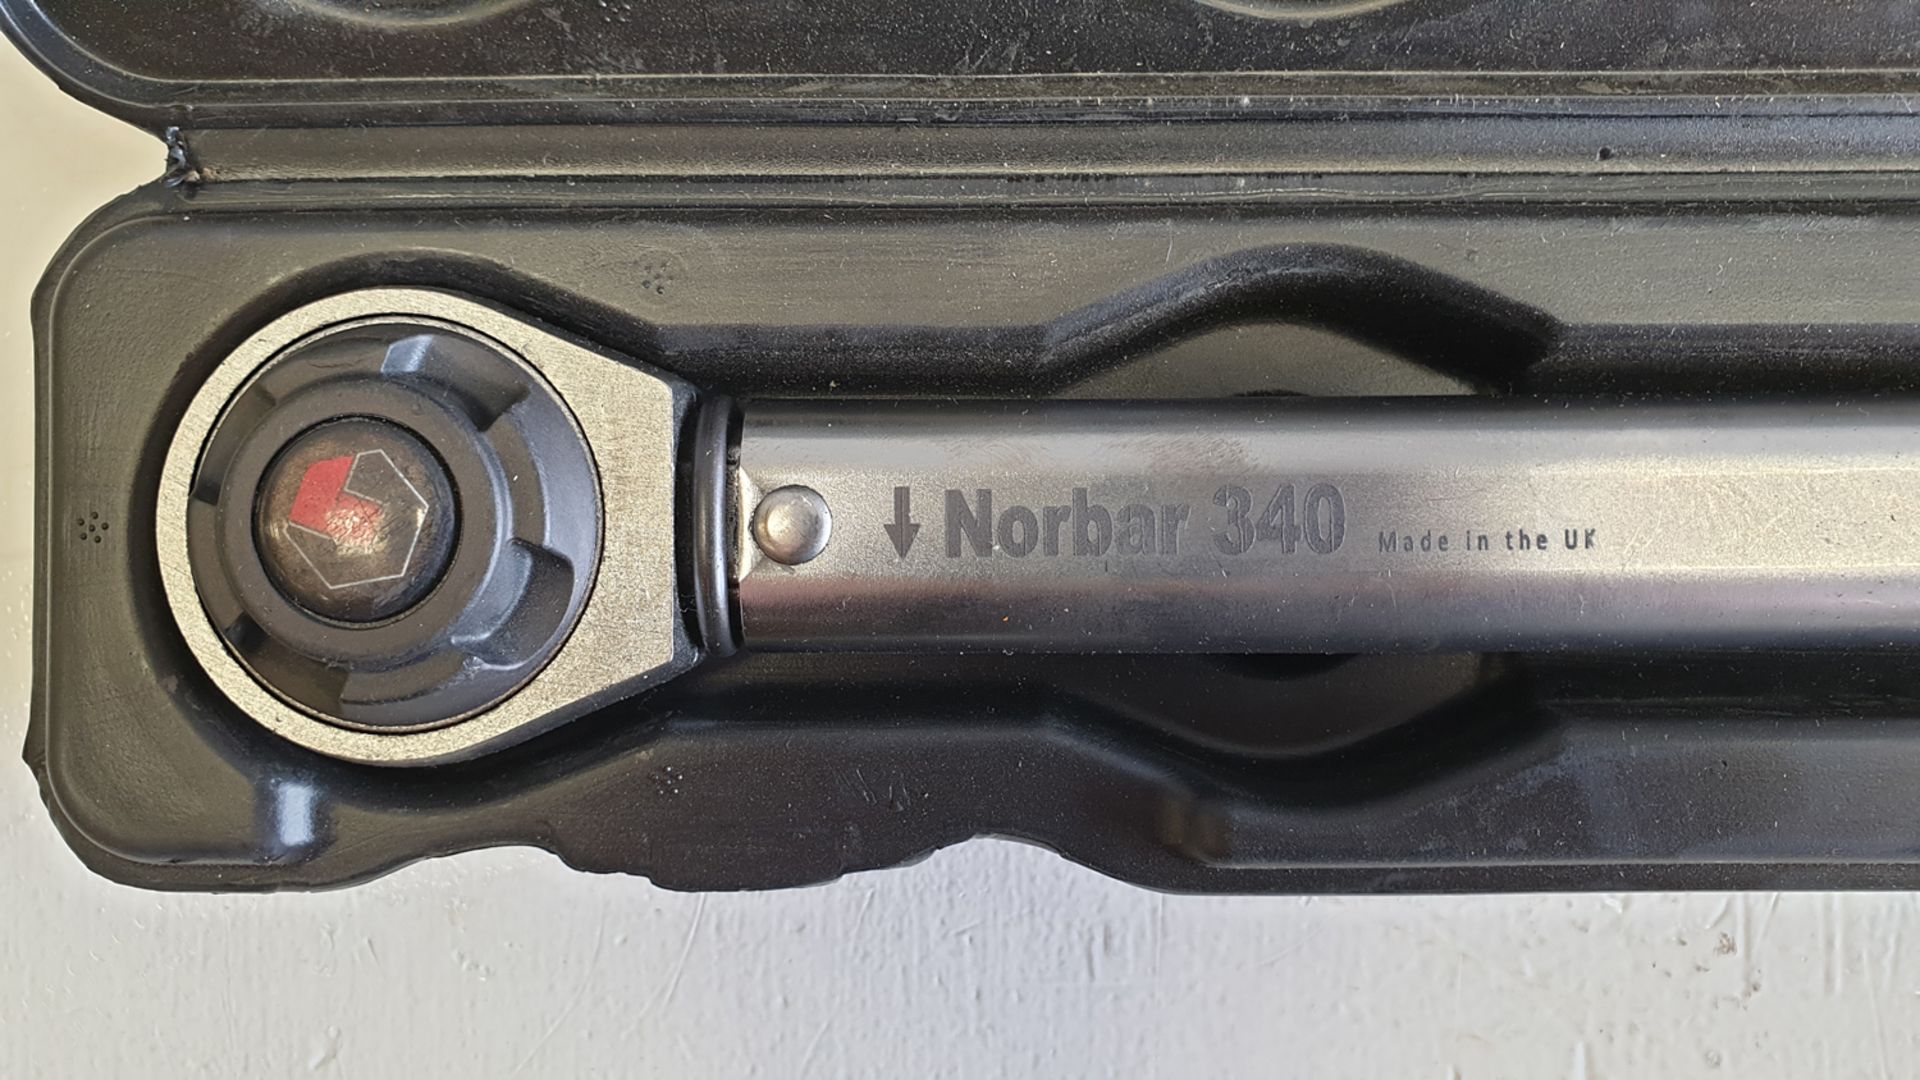 NORBAR 1/2" Square Torque Wrench. In Case. - Image 2 of 5